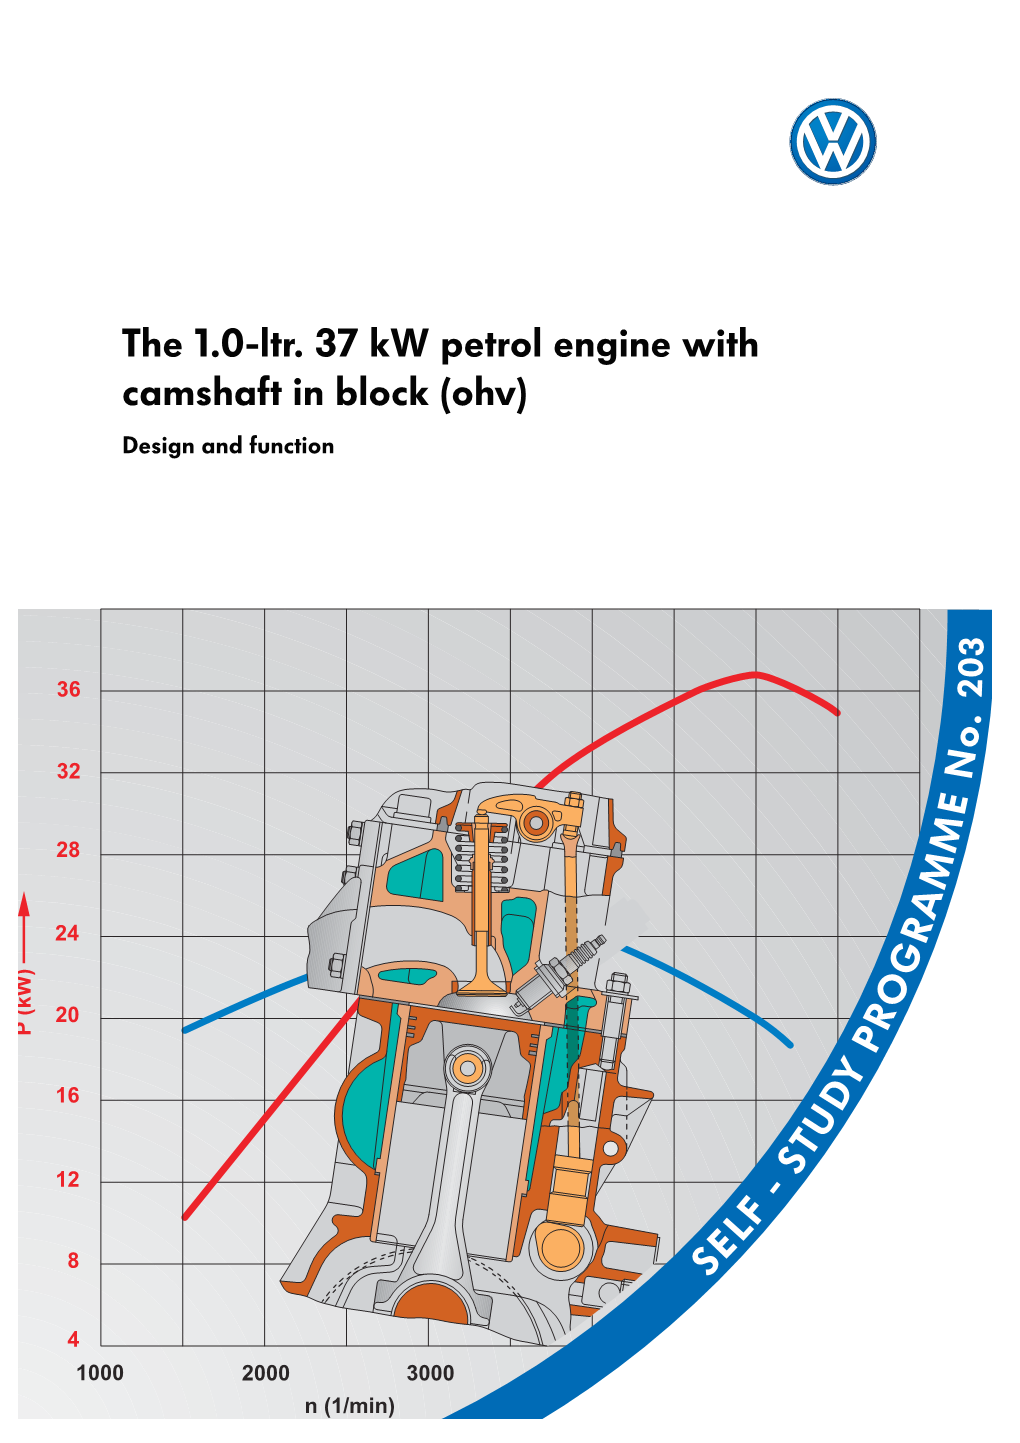 The 1.0-Ltr. 37 Kw Petrol Engine with Camshaft in Block (Ohv) Design and Function